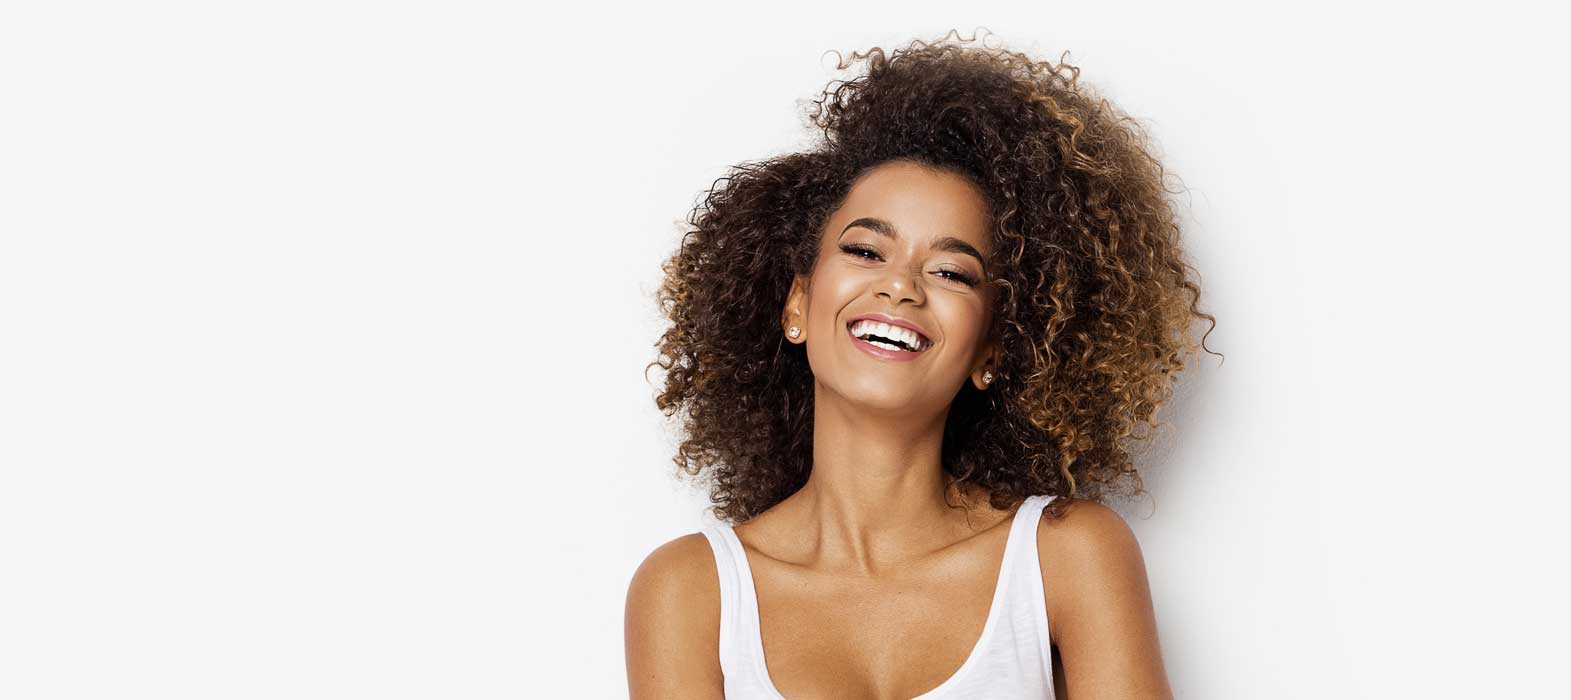 Young with afro and beautiful smile